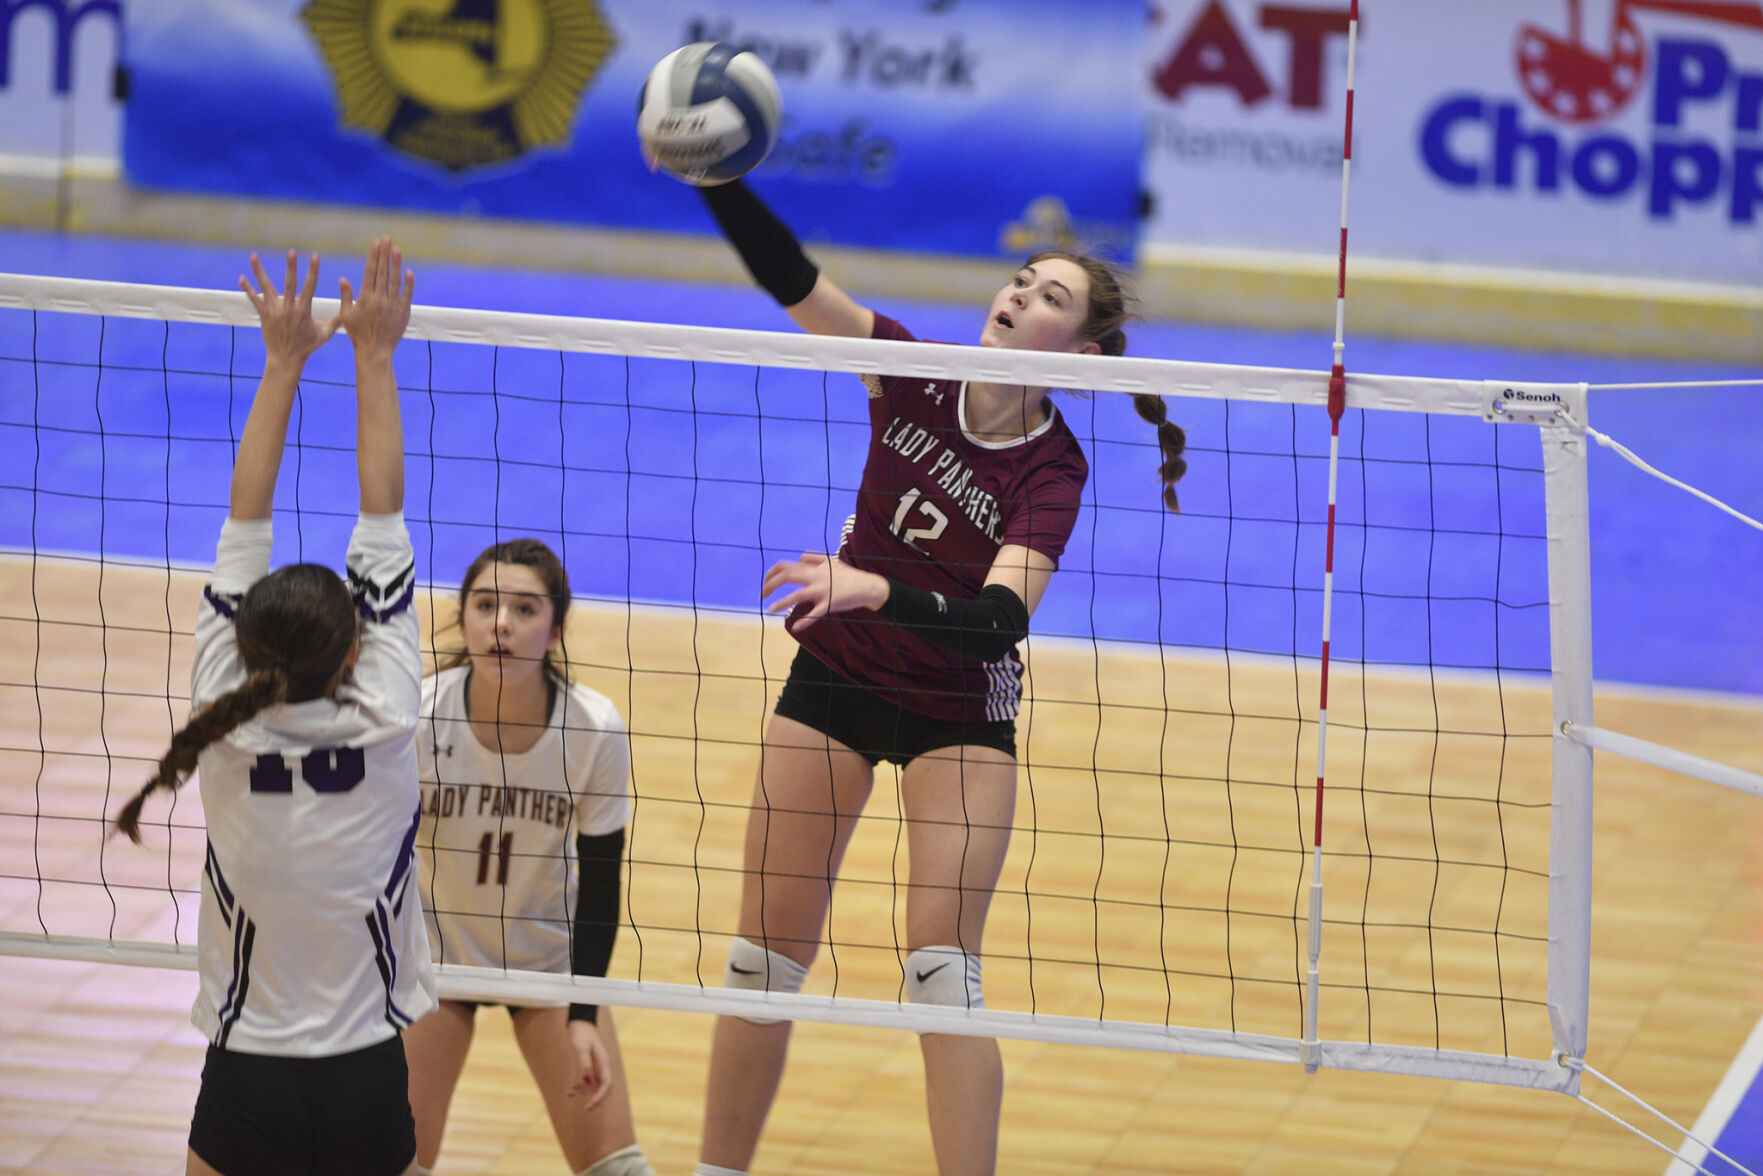 Portville girls volleyball repeats as state champion